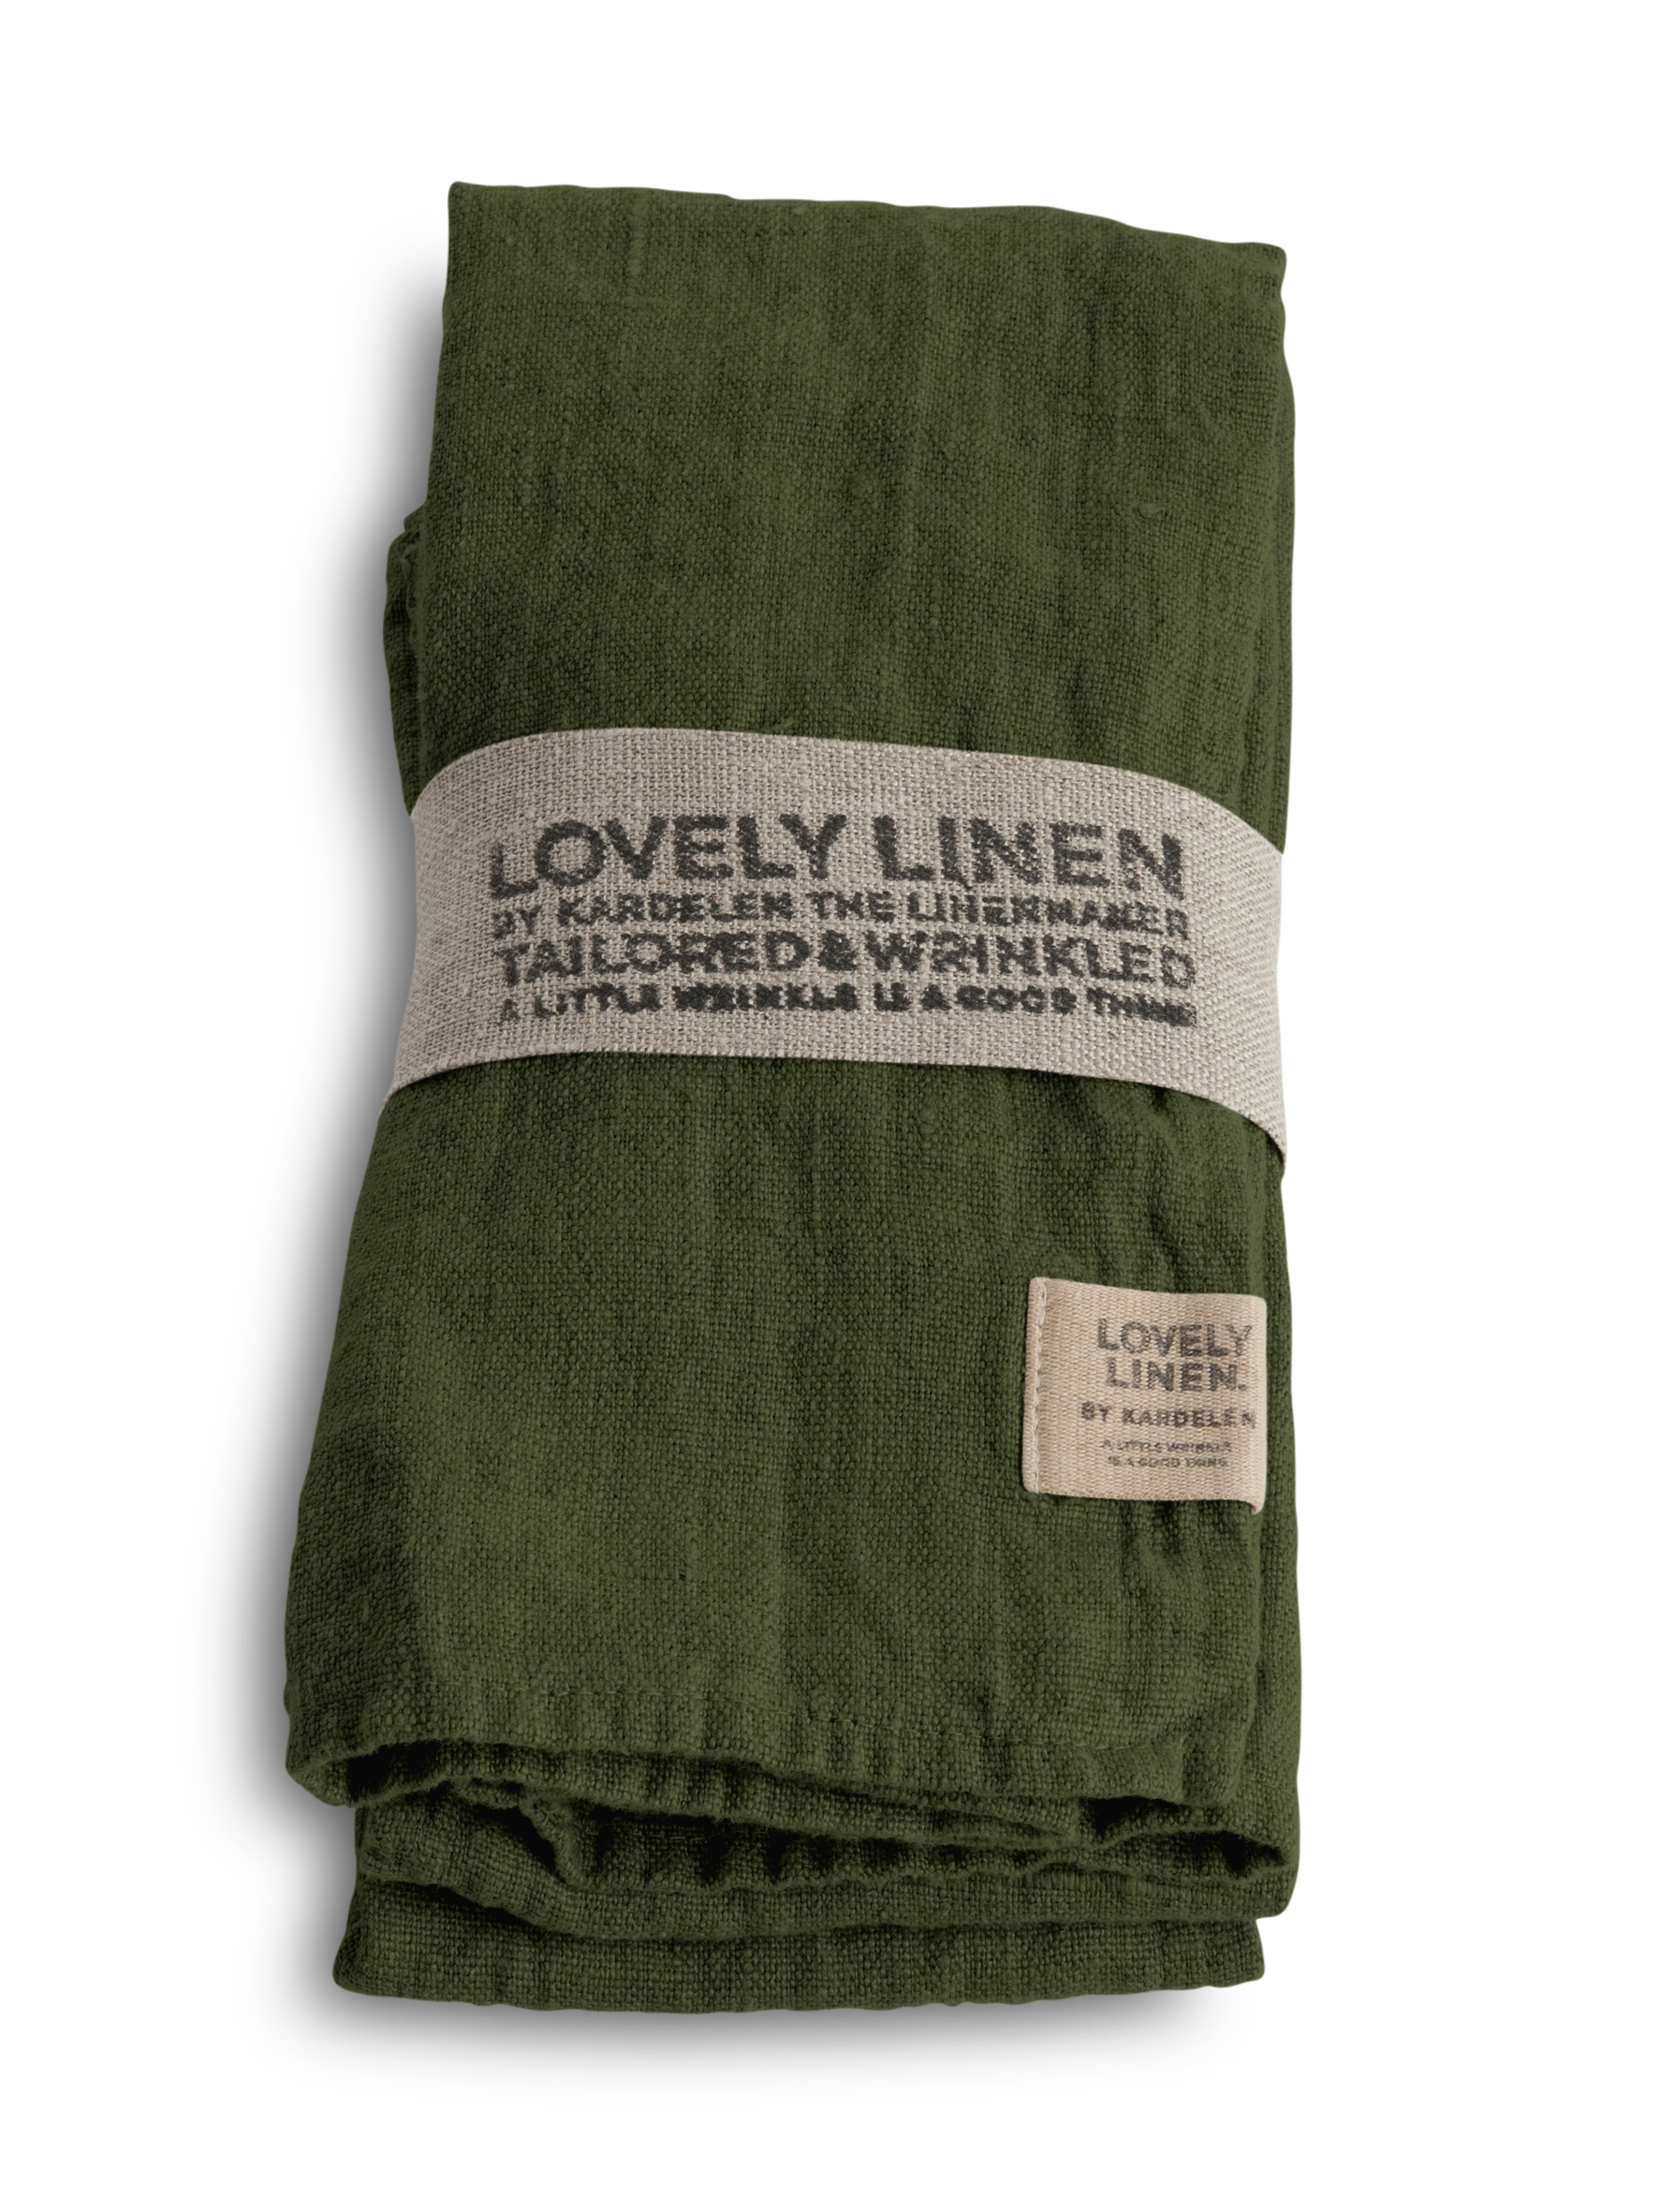 Lovely Linen 100% European Linen Table Cloth in Jeep Green (size L)